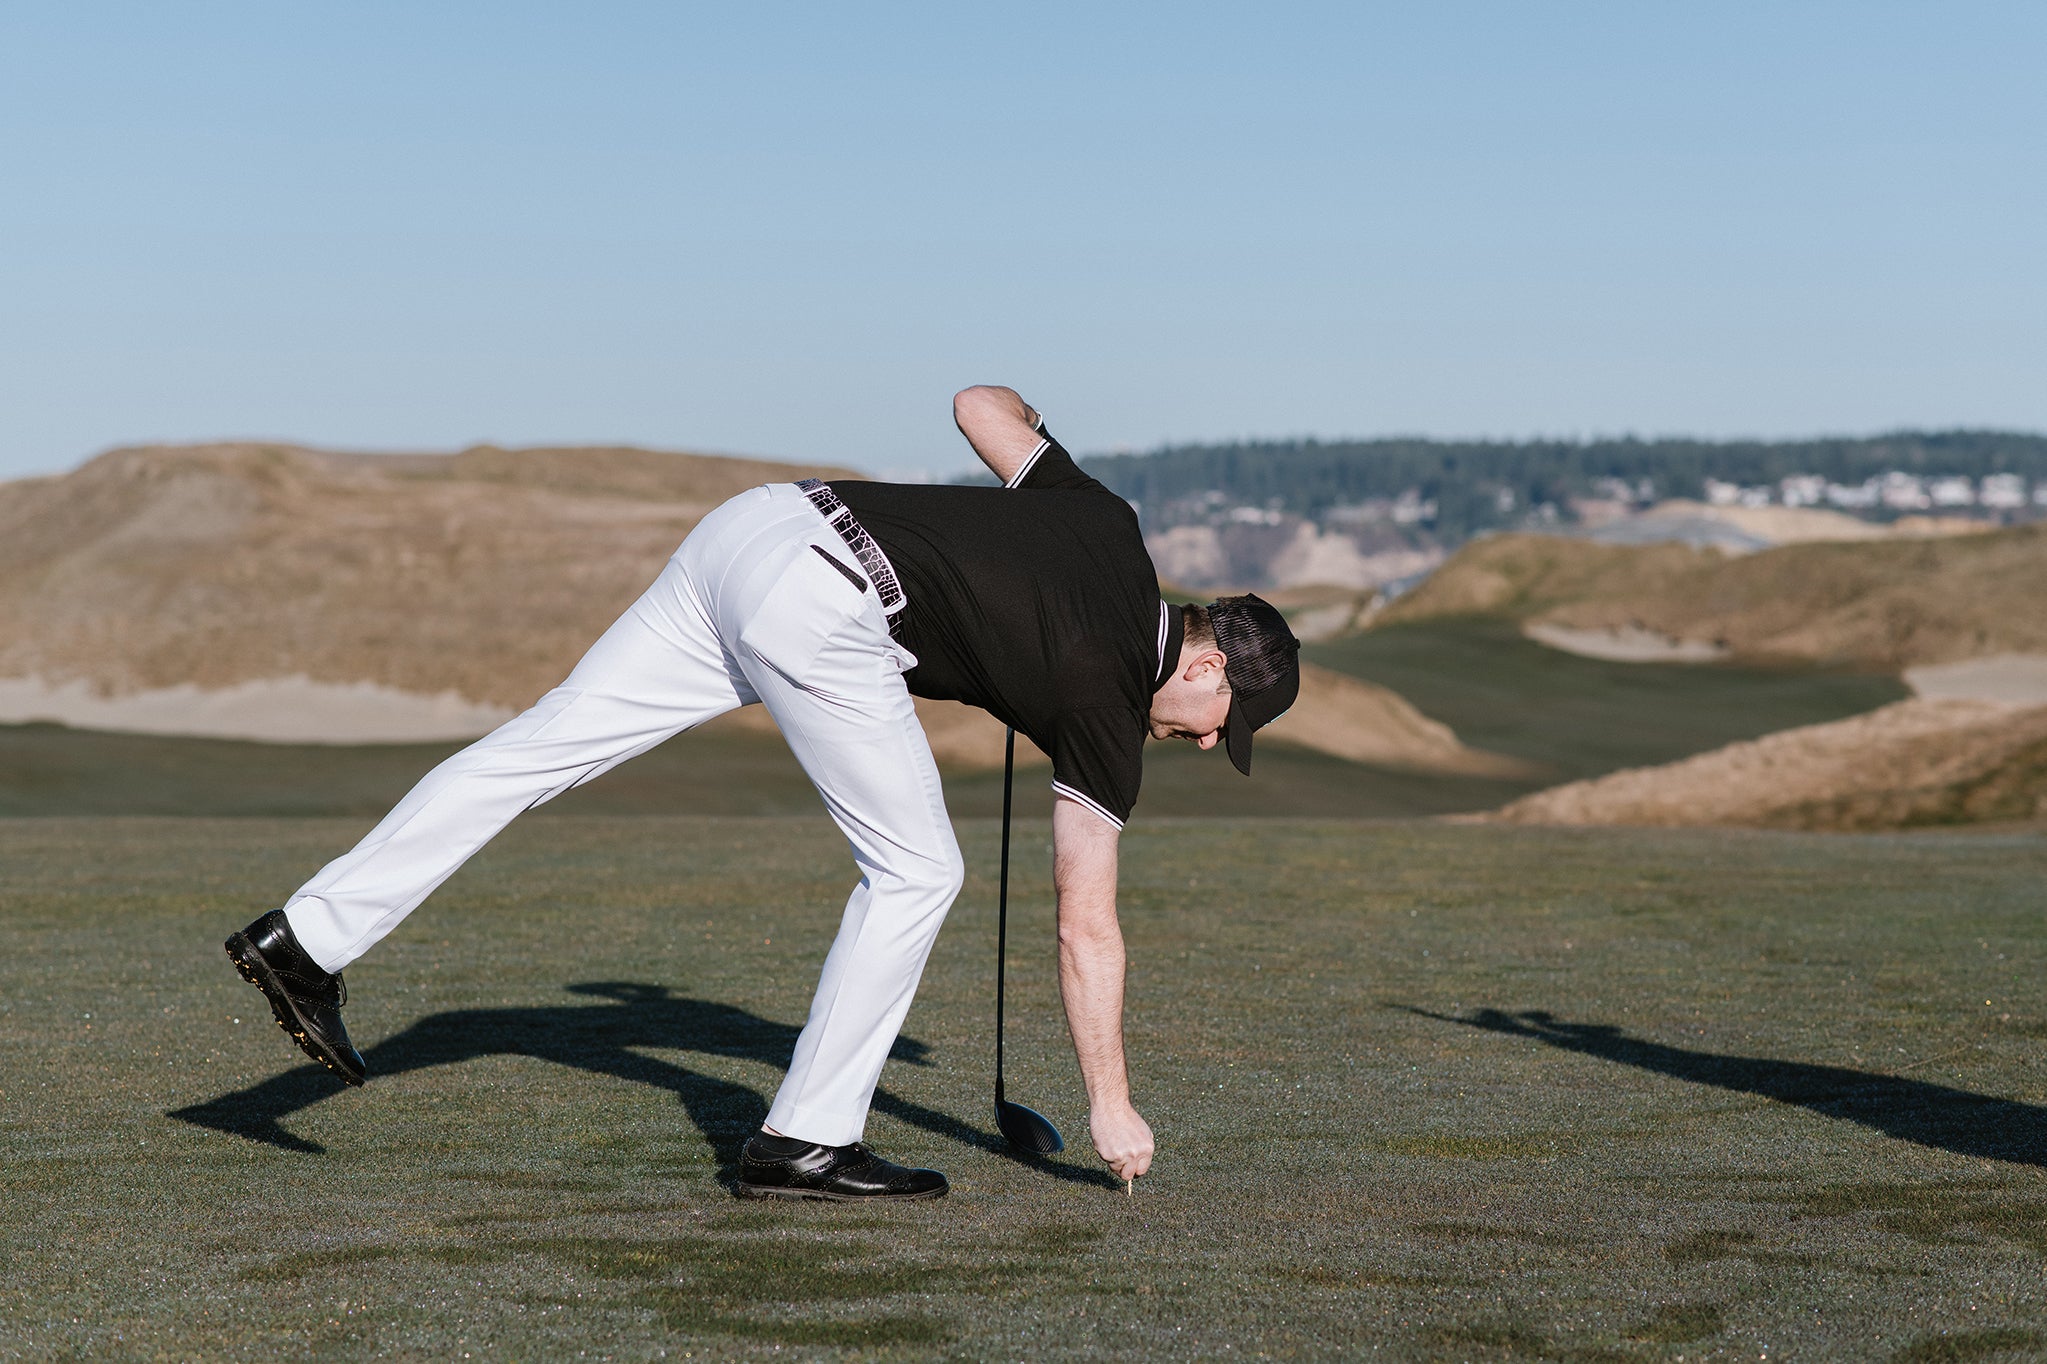 Playing golf during a pandemic might be safe. But is it responsible?